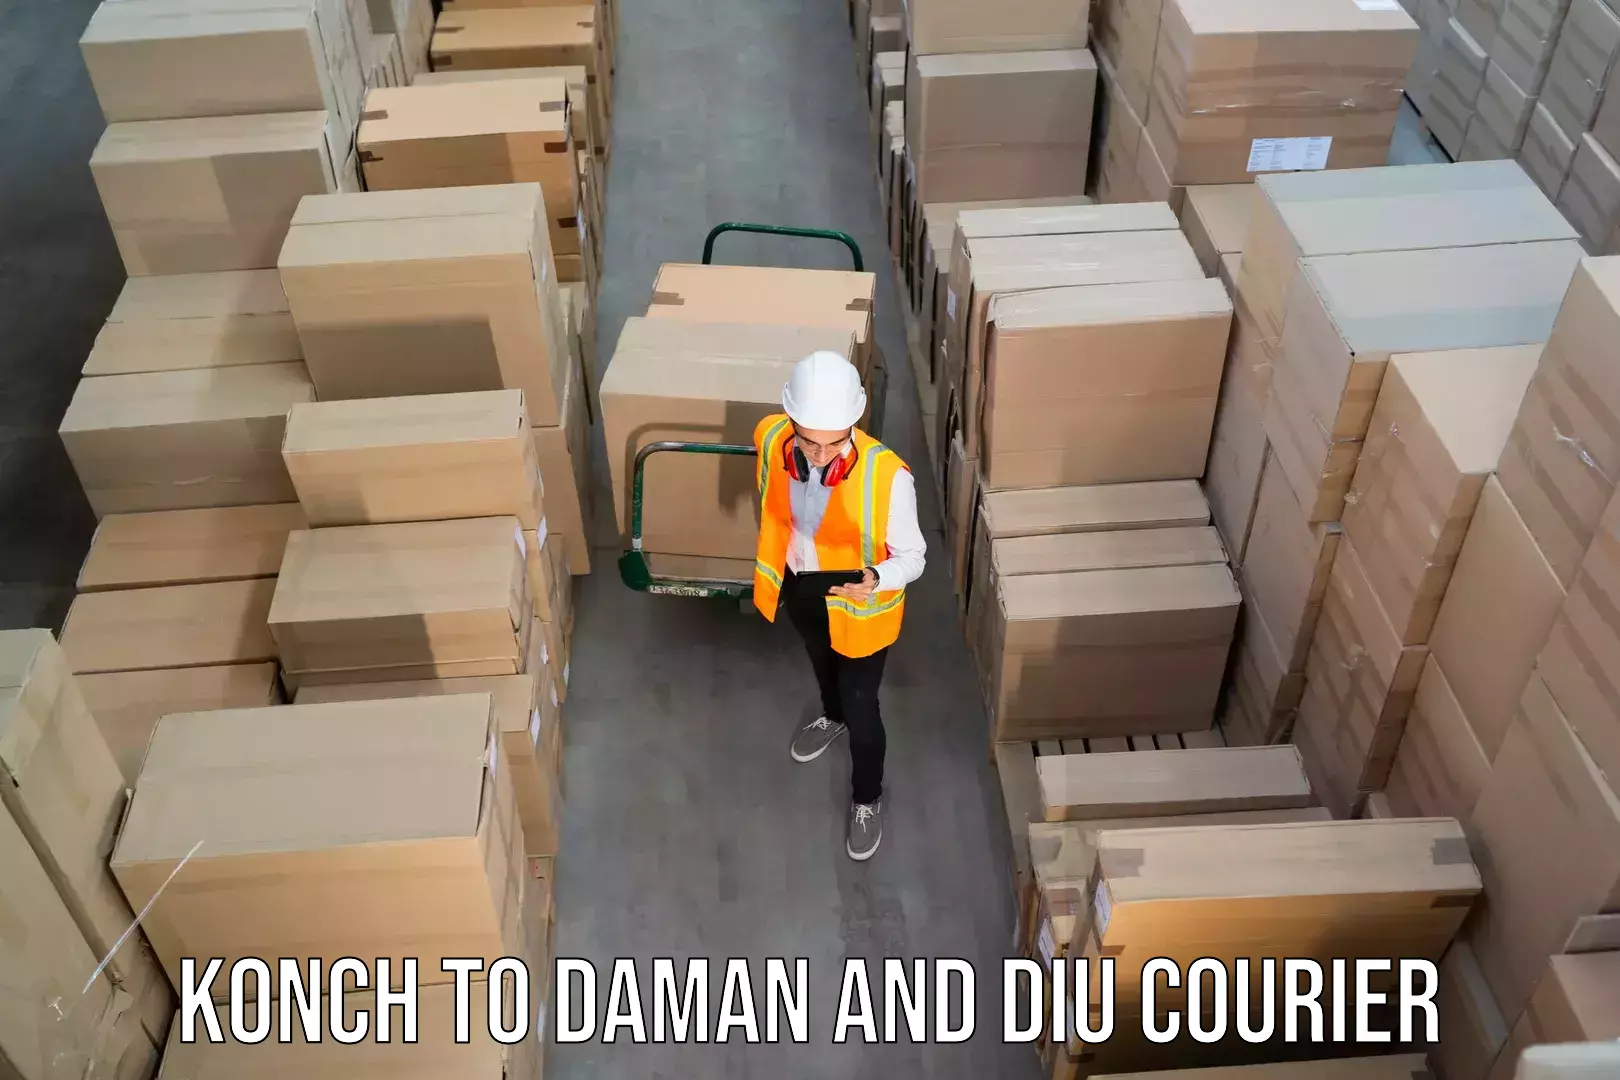 Cost-effective courier options Konch to Daman and Diu